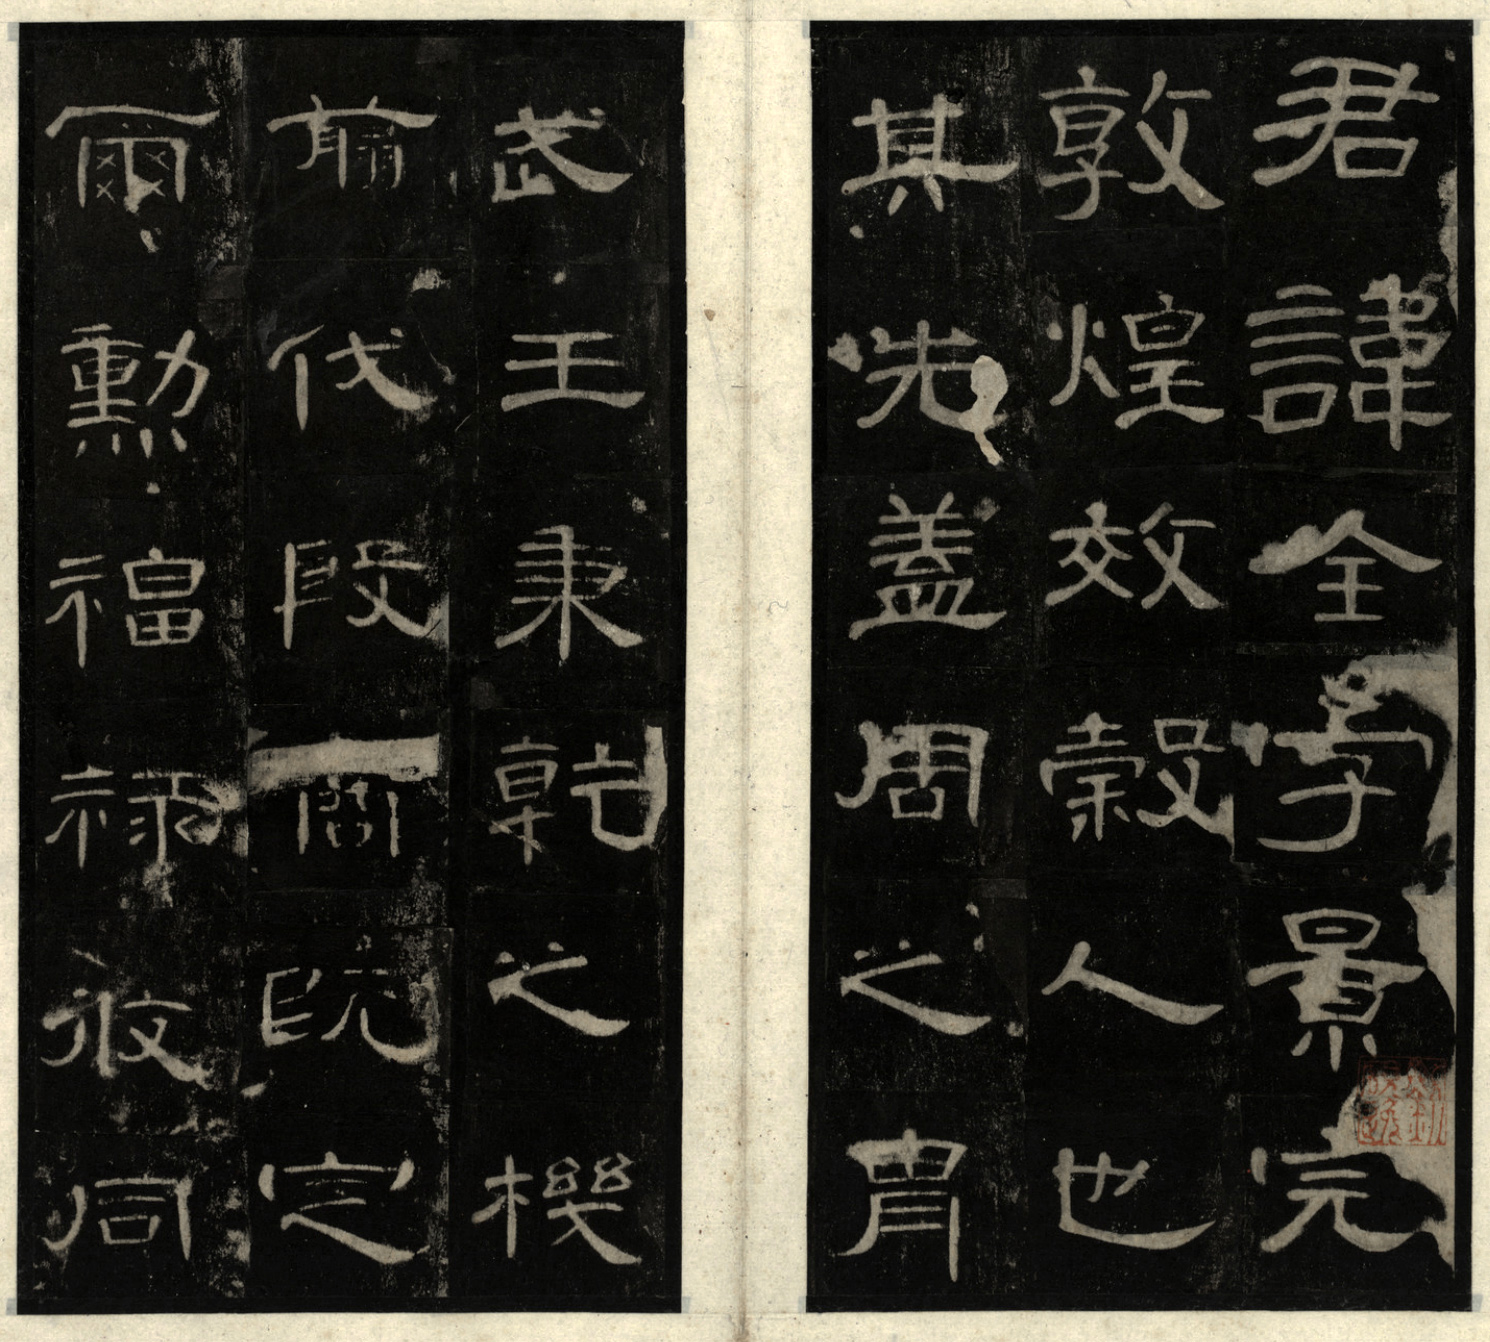 Chinese Calligraphy, History, Art & Elements